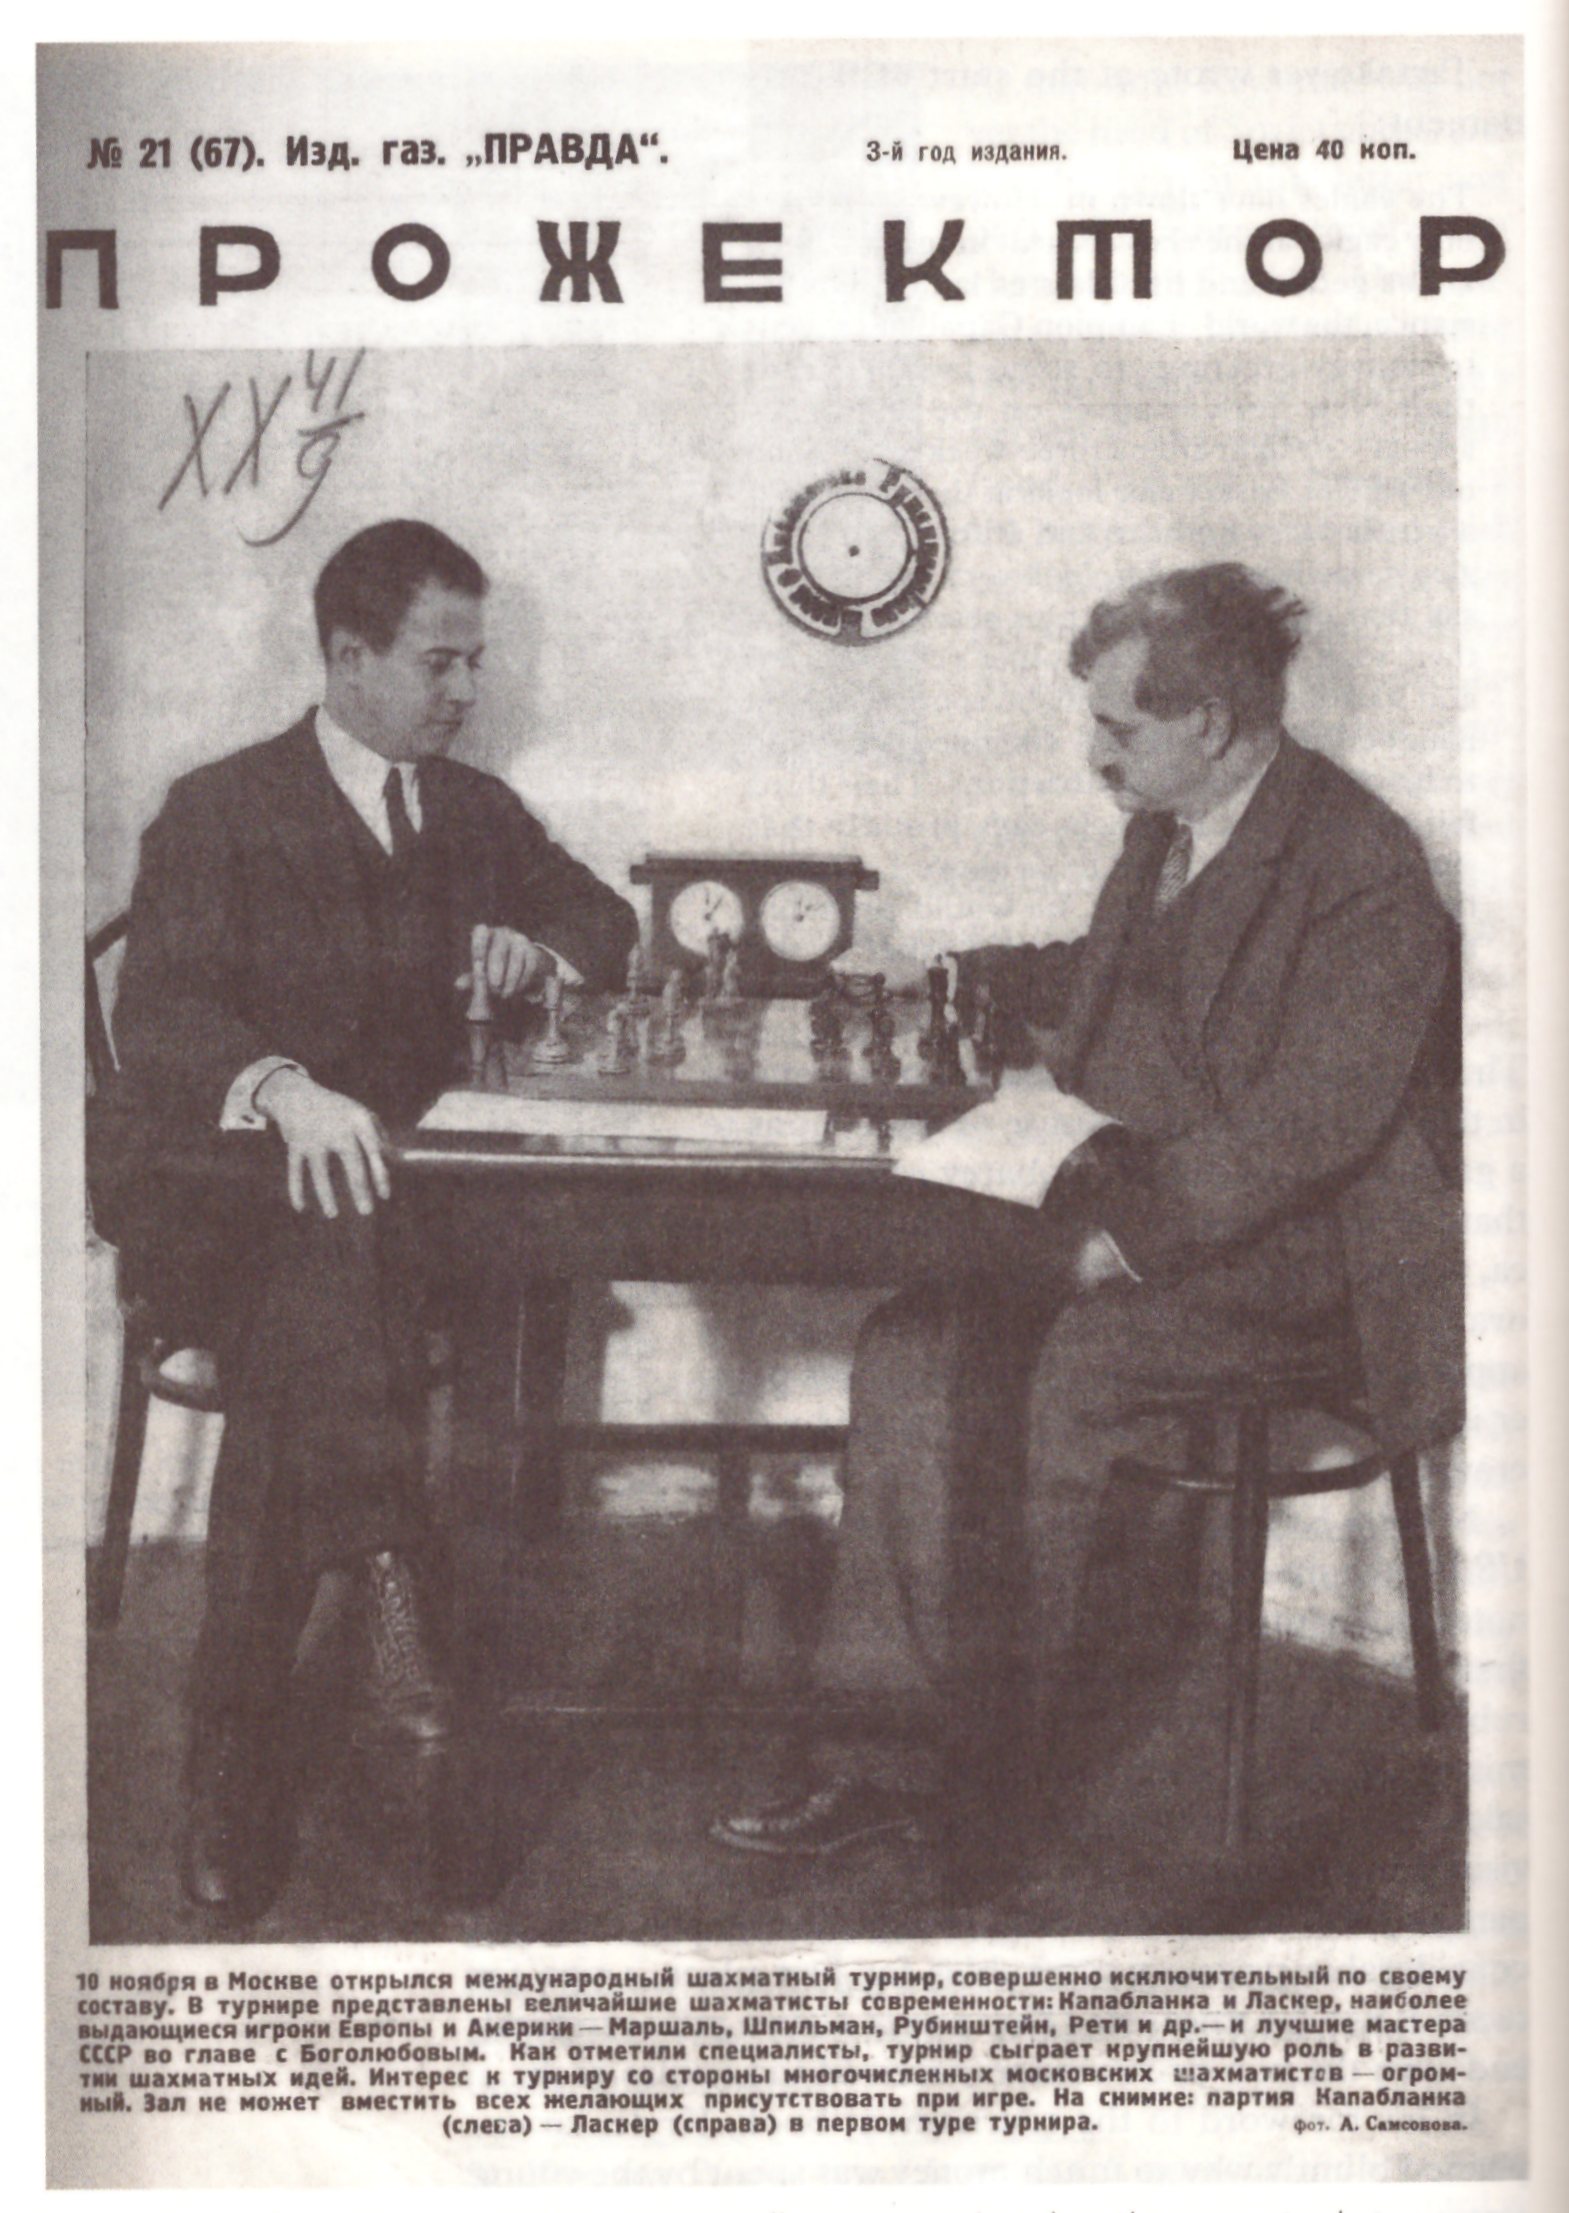 What was the playing style of Emanuel Lasker in chess? - Quora